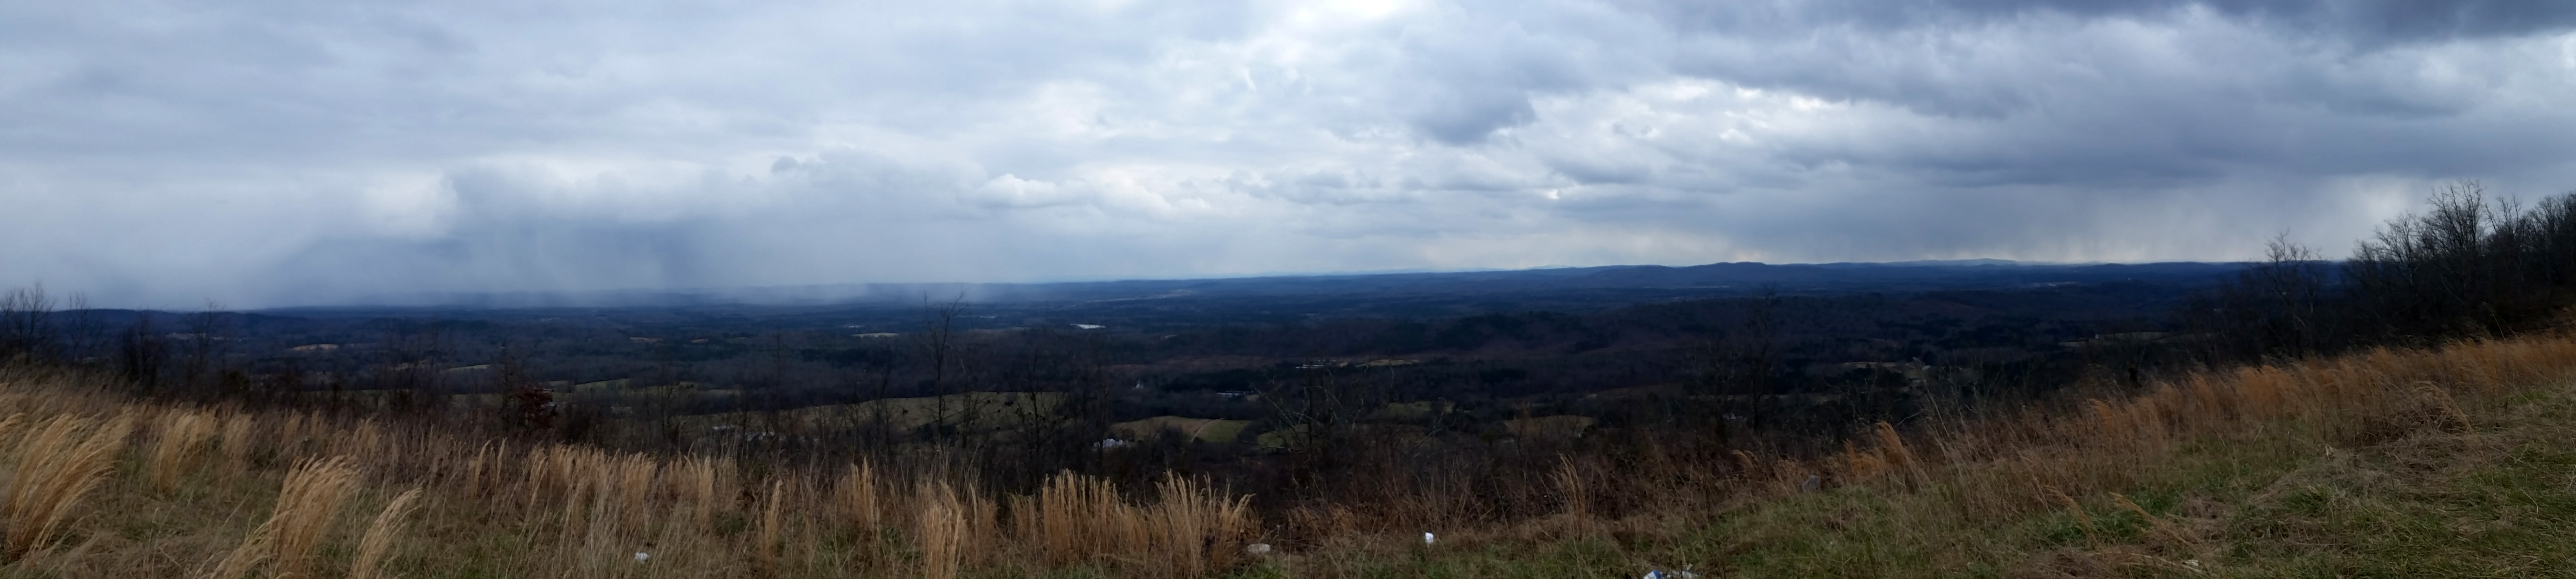 Snow showers visible from the top of Blount Mountain near Straight Mountain, Alabama.